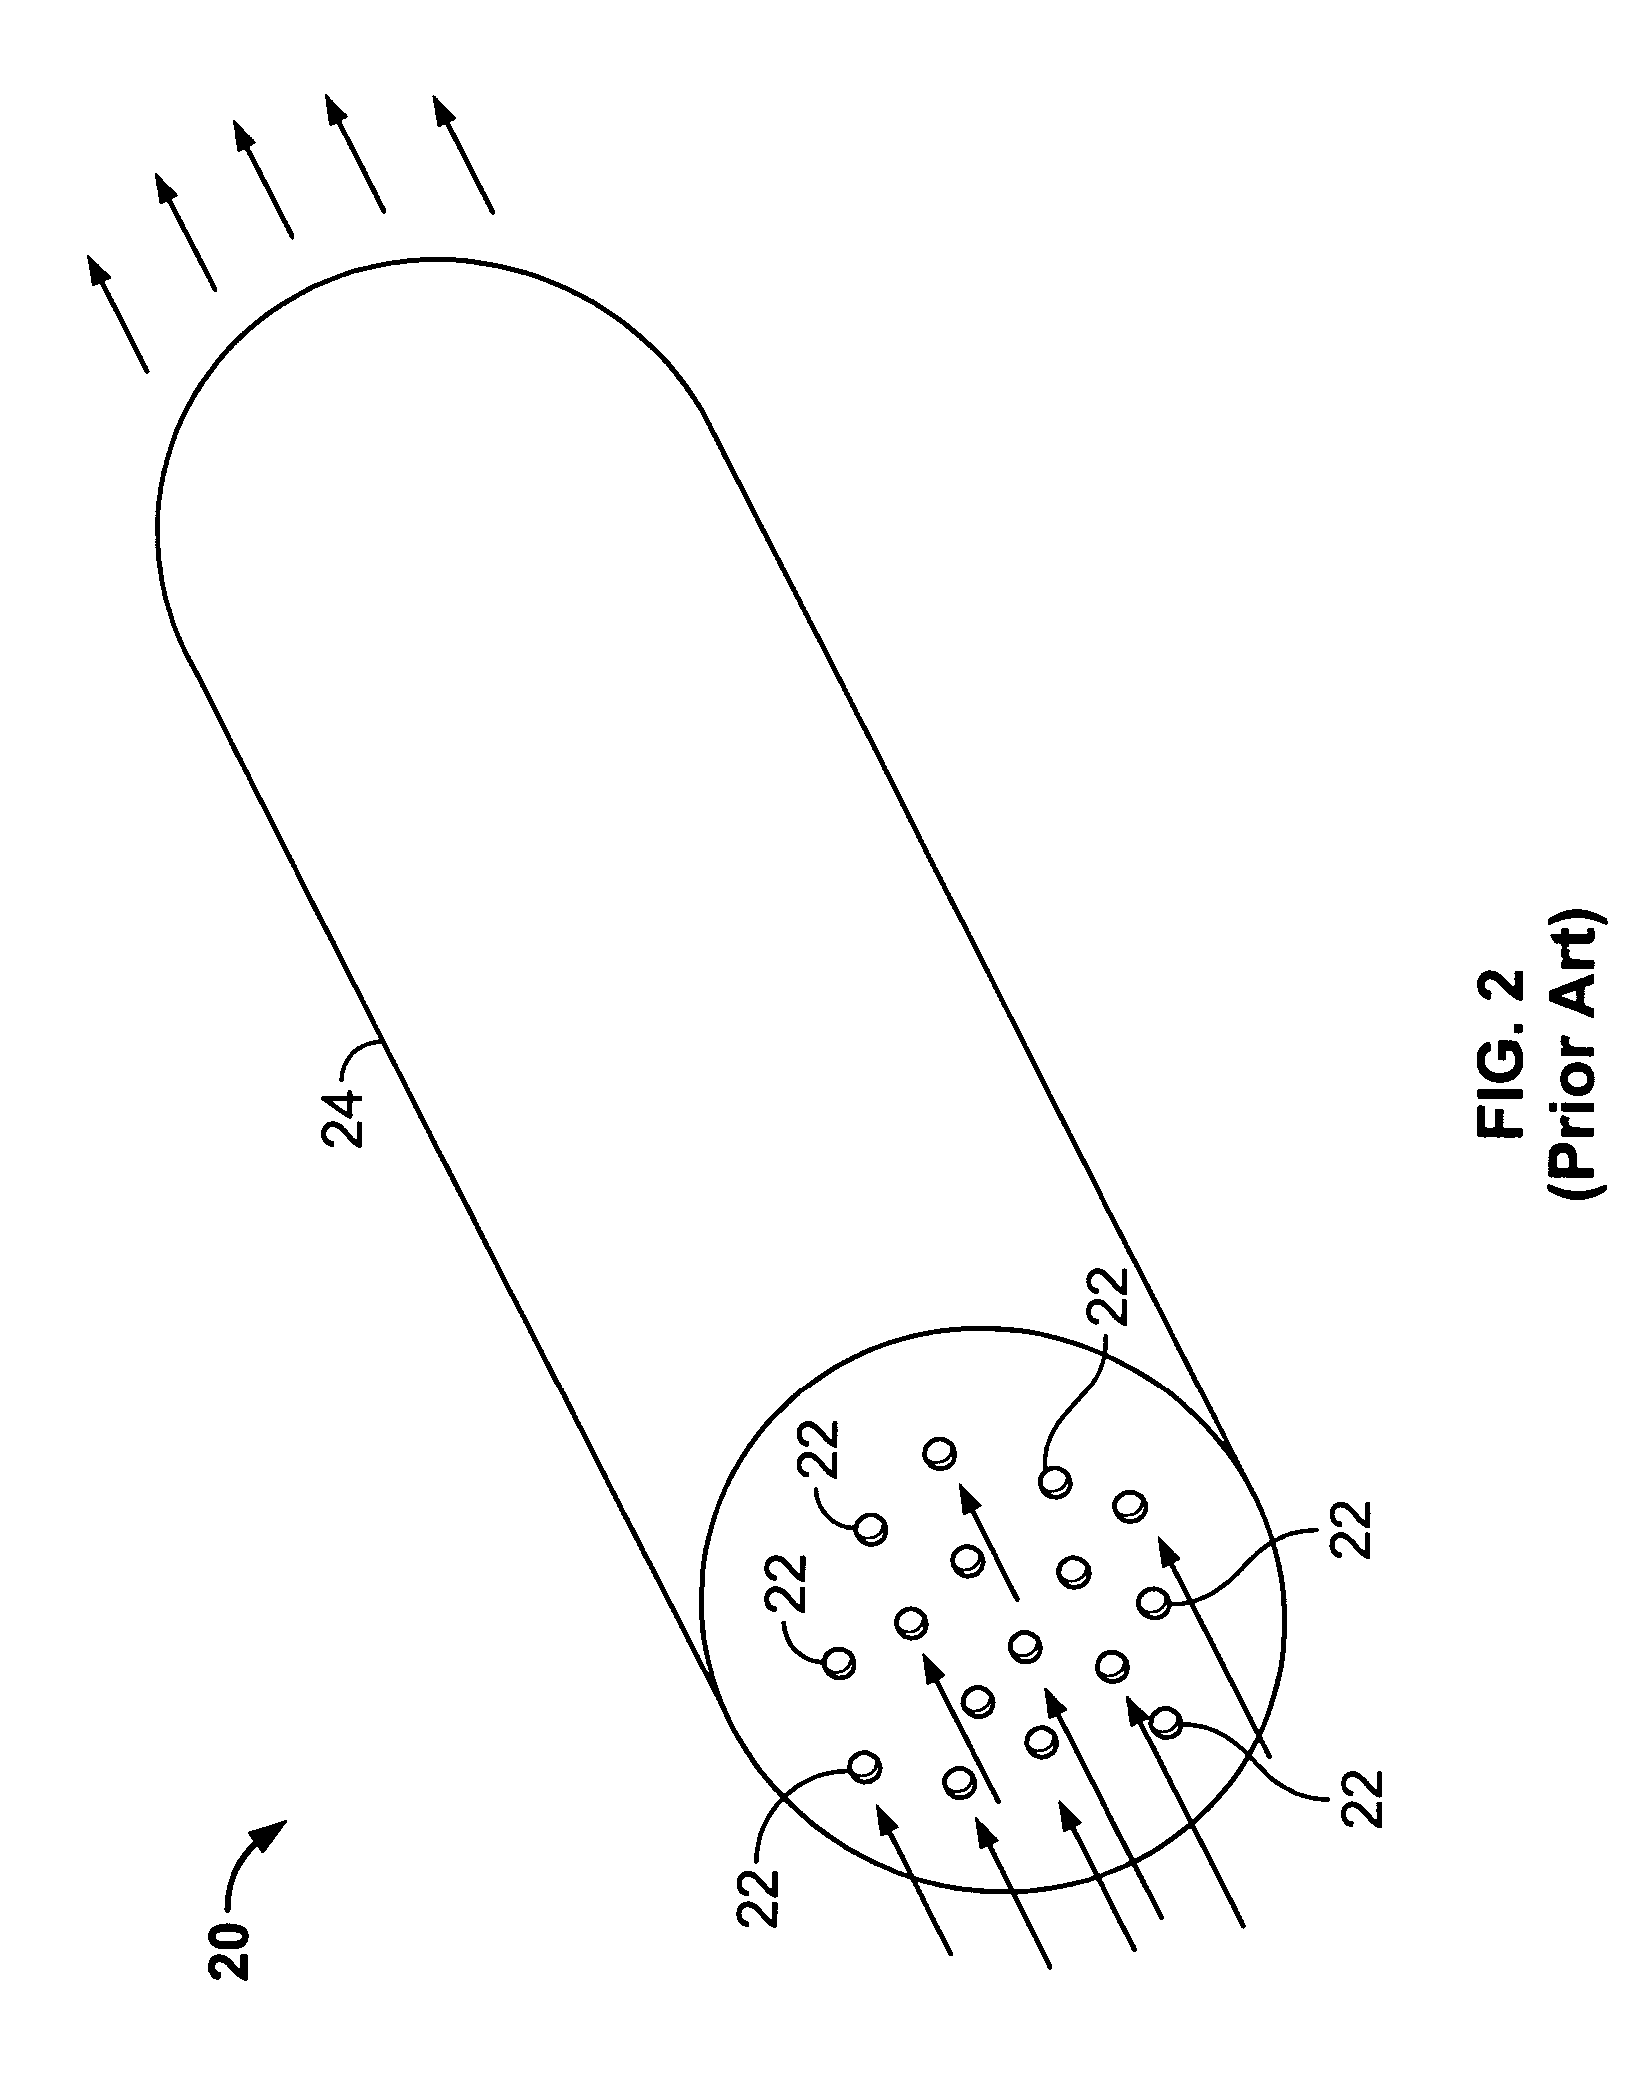 Thermal storage unit and methods for using the same to heat a fluid